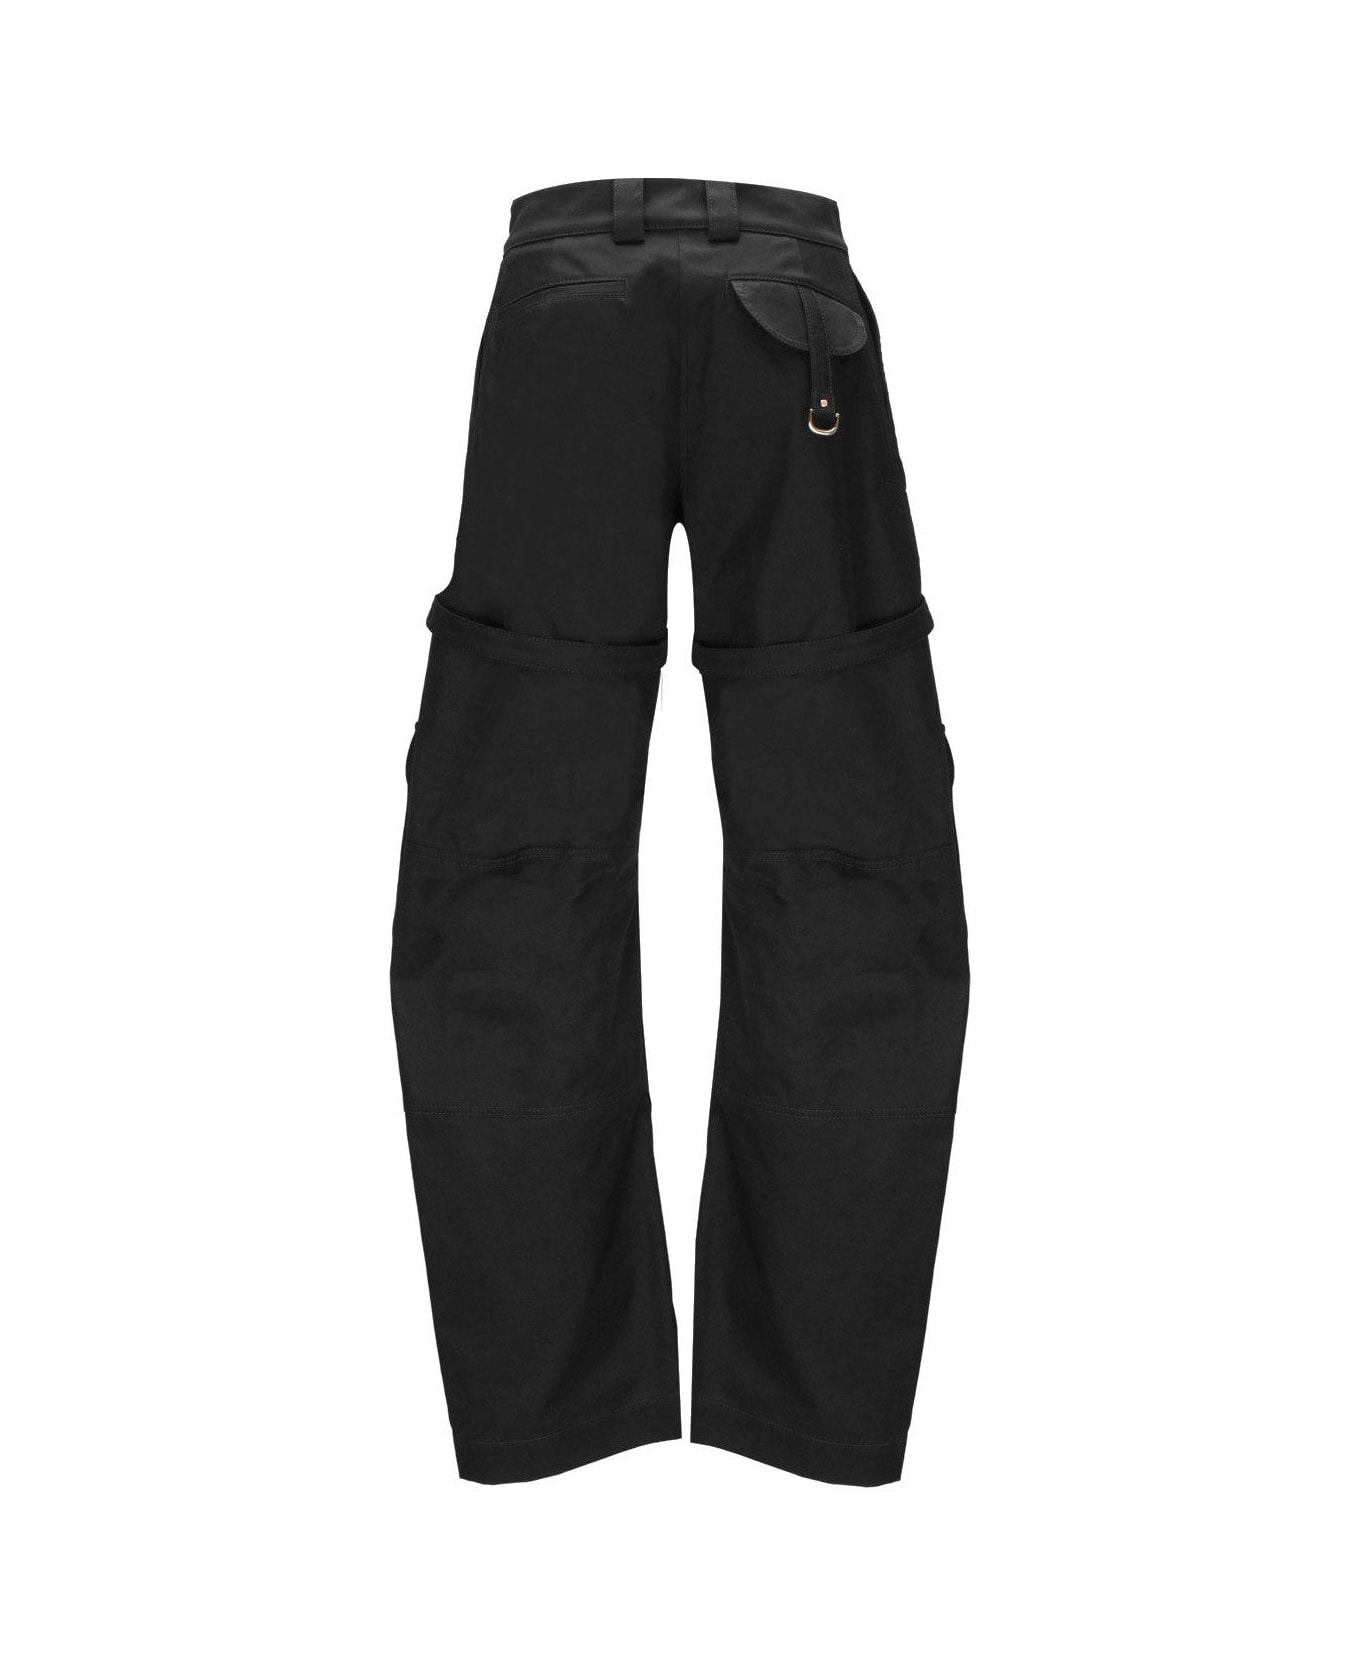 Off-White Buckle Detailed Straight Leg Trousers - Black